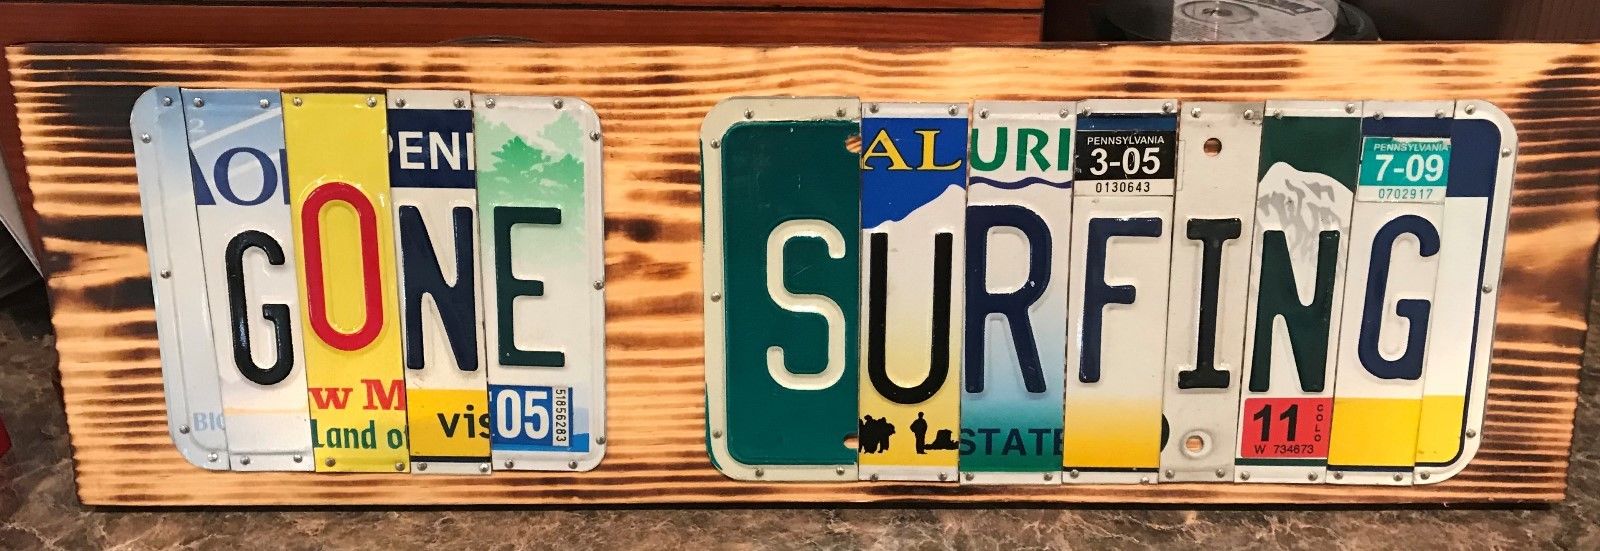 Gone Surfing 24 inches License Plate Sign Surfboard Surfer